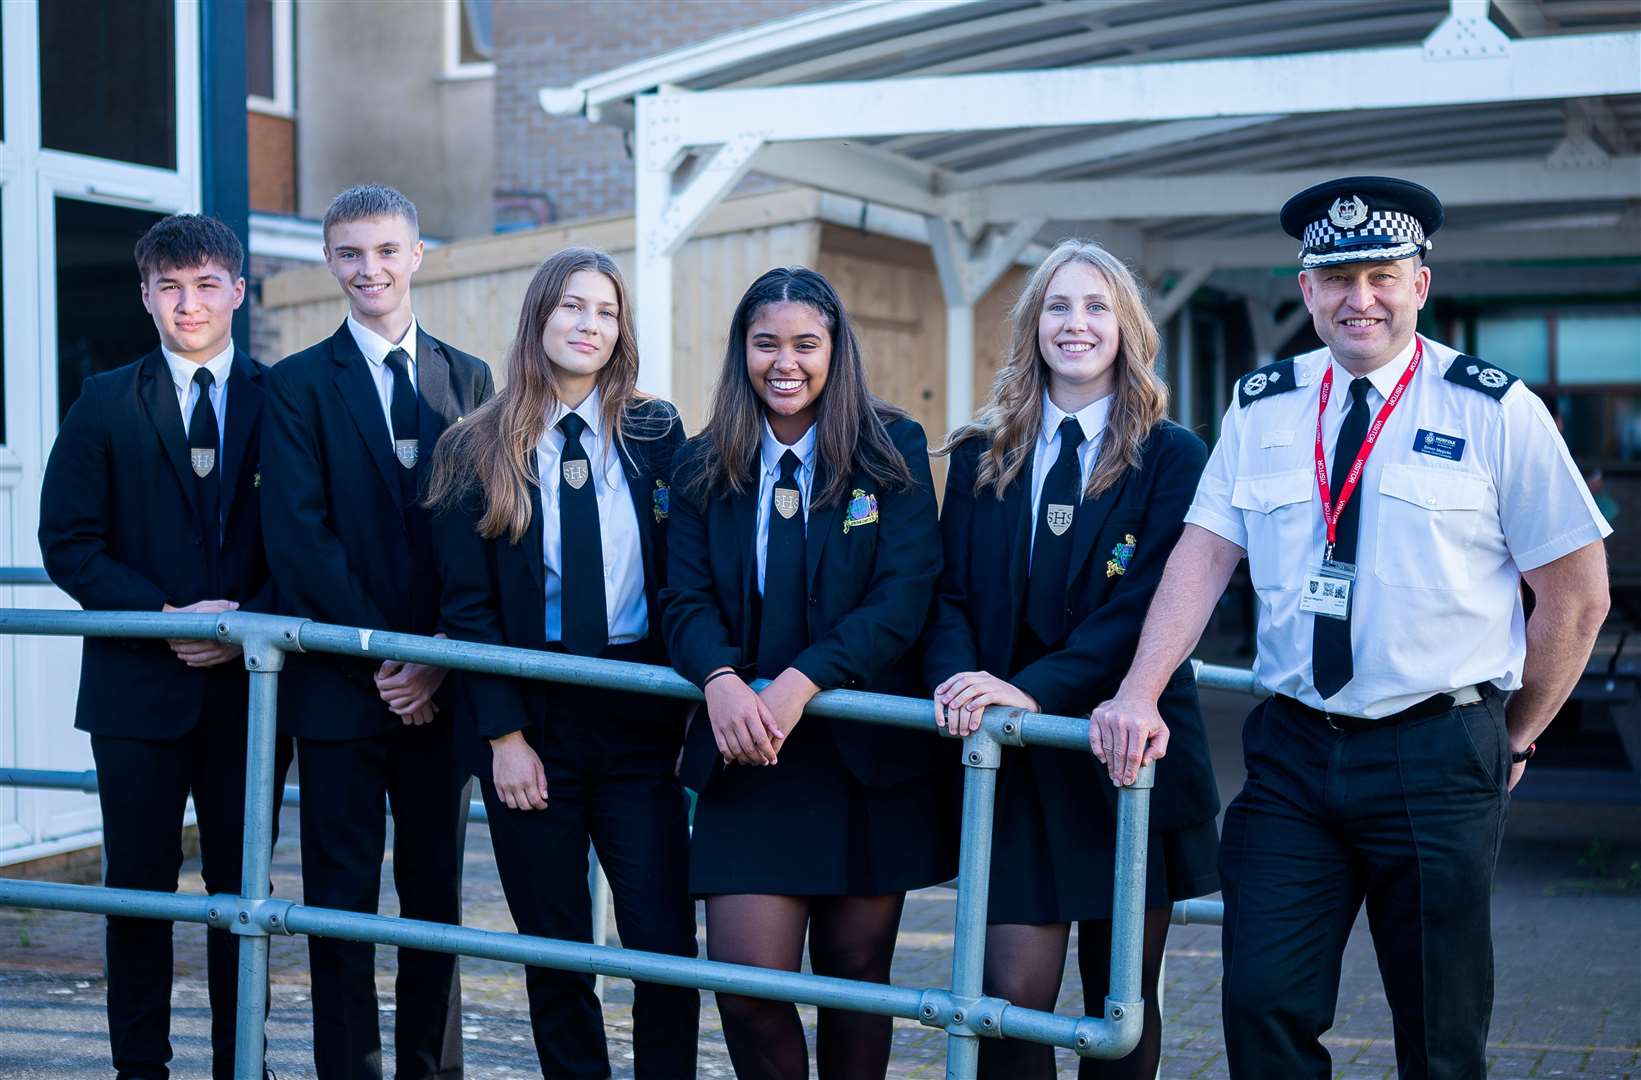 Detective Chief Constable Simon Megicks with some of the Year 11 students.